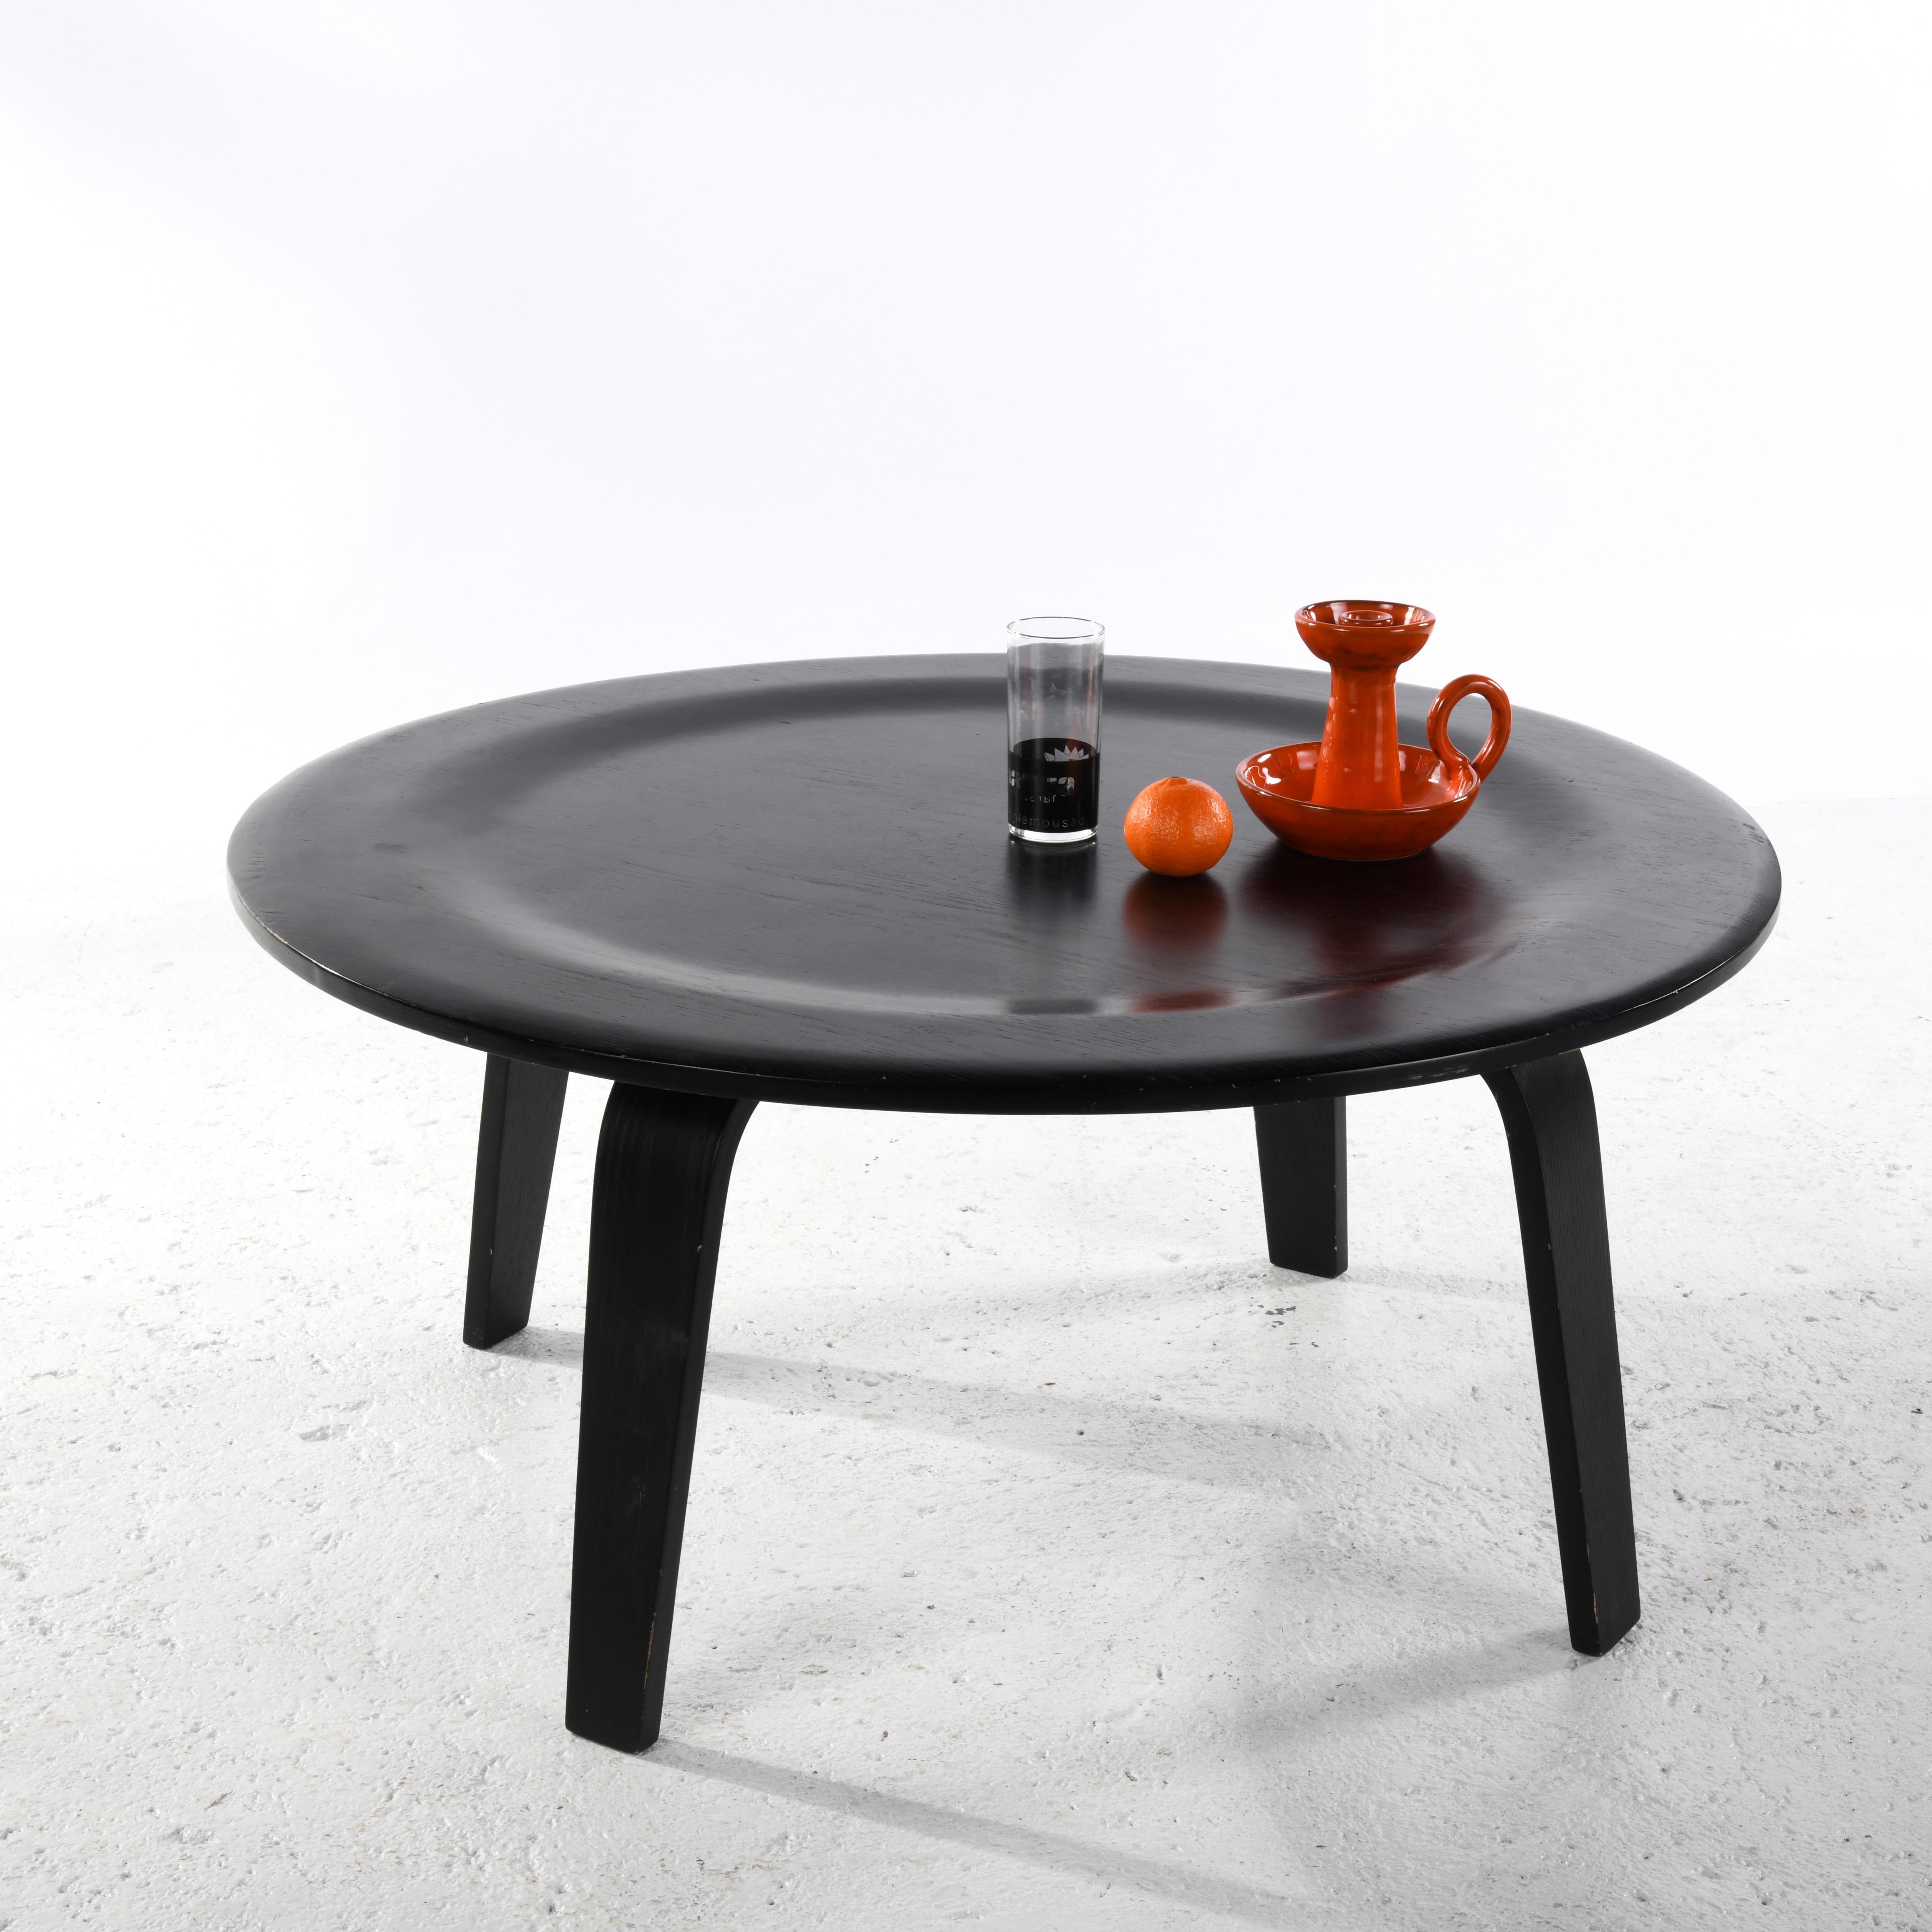 CTW coffee table in moulded and painted plywood, designed by Ray and Charles Eames in 1946. From 1994 onwards, the publisher Hermann Miller offered the fourth generation of this model, with coloured painted versions and not just in stained natural